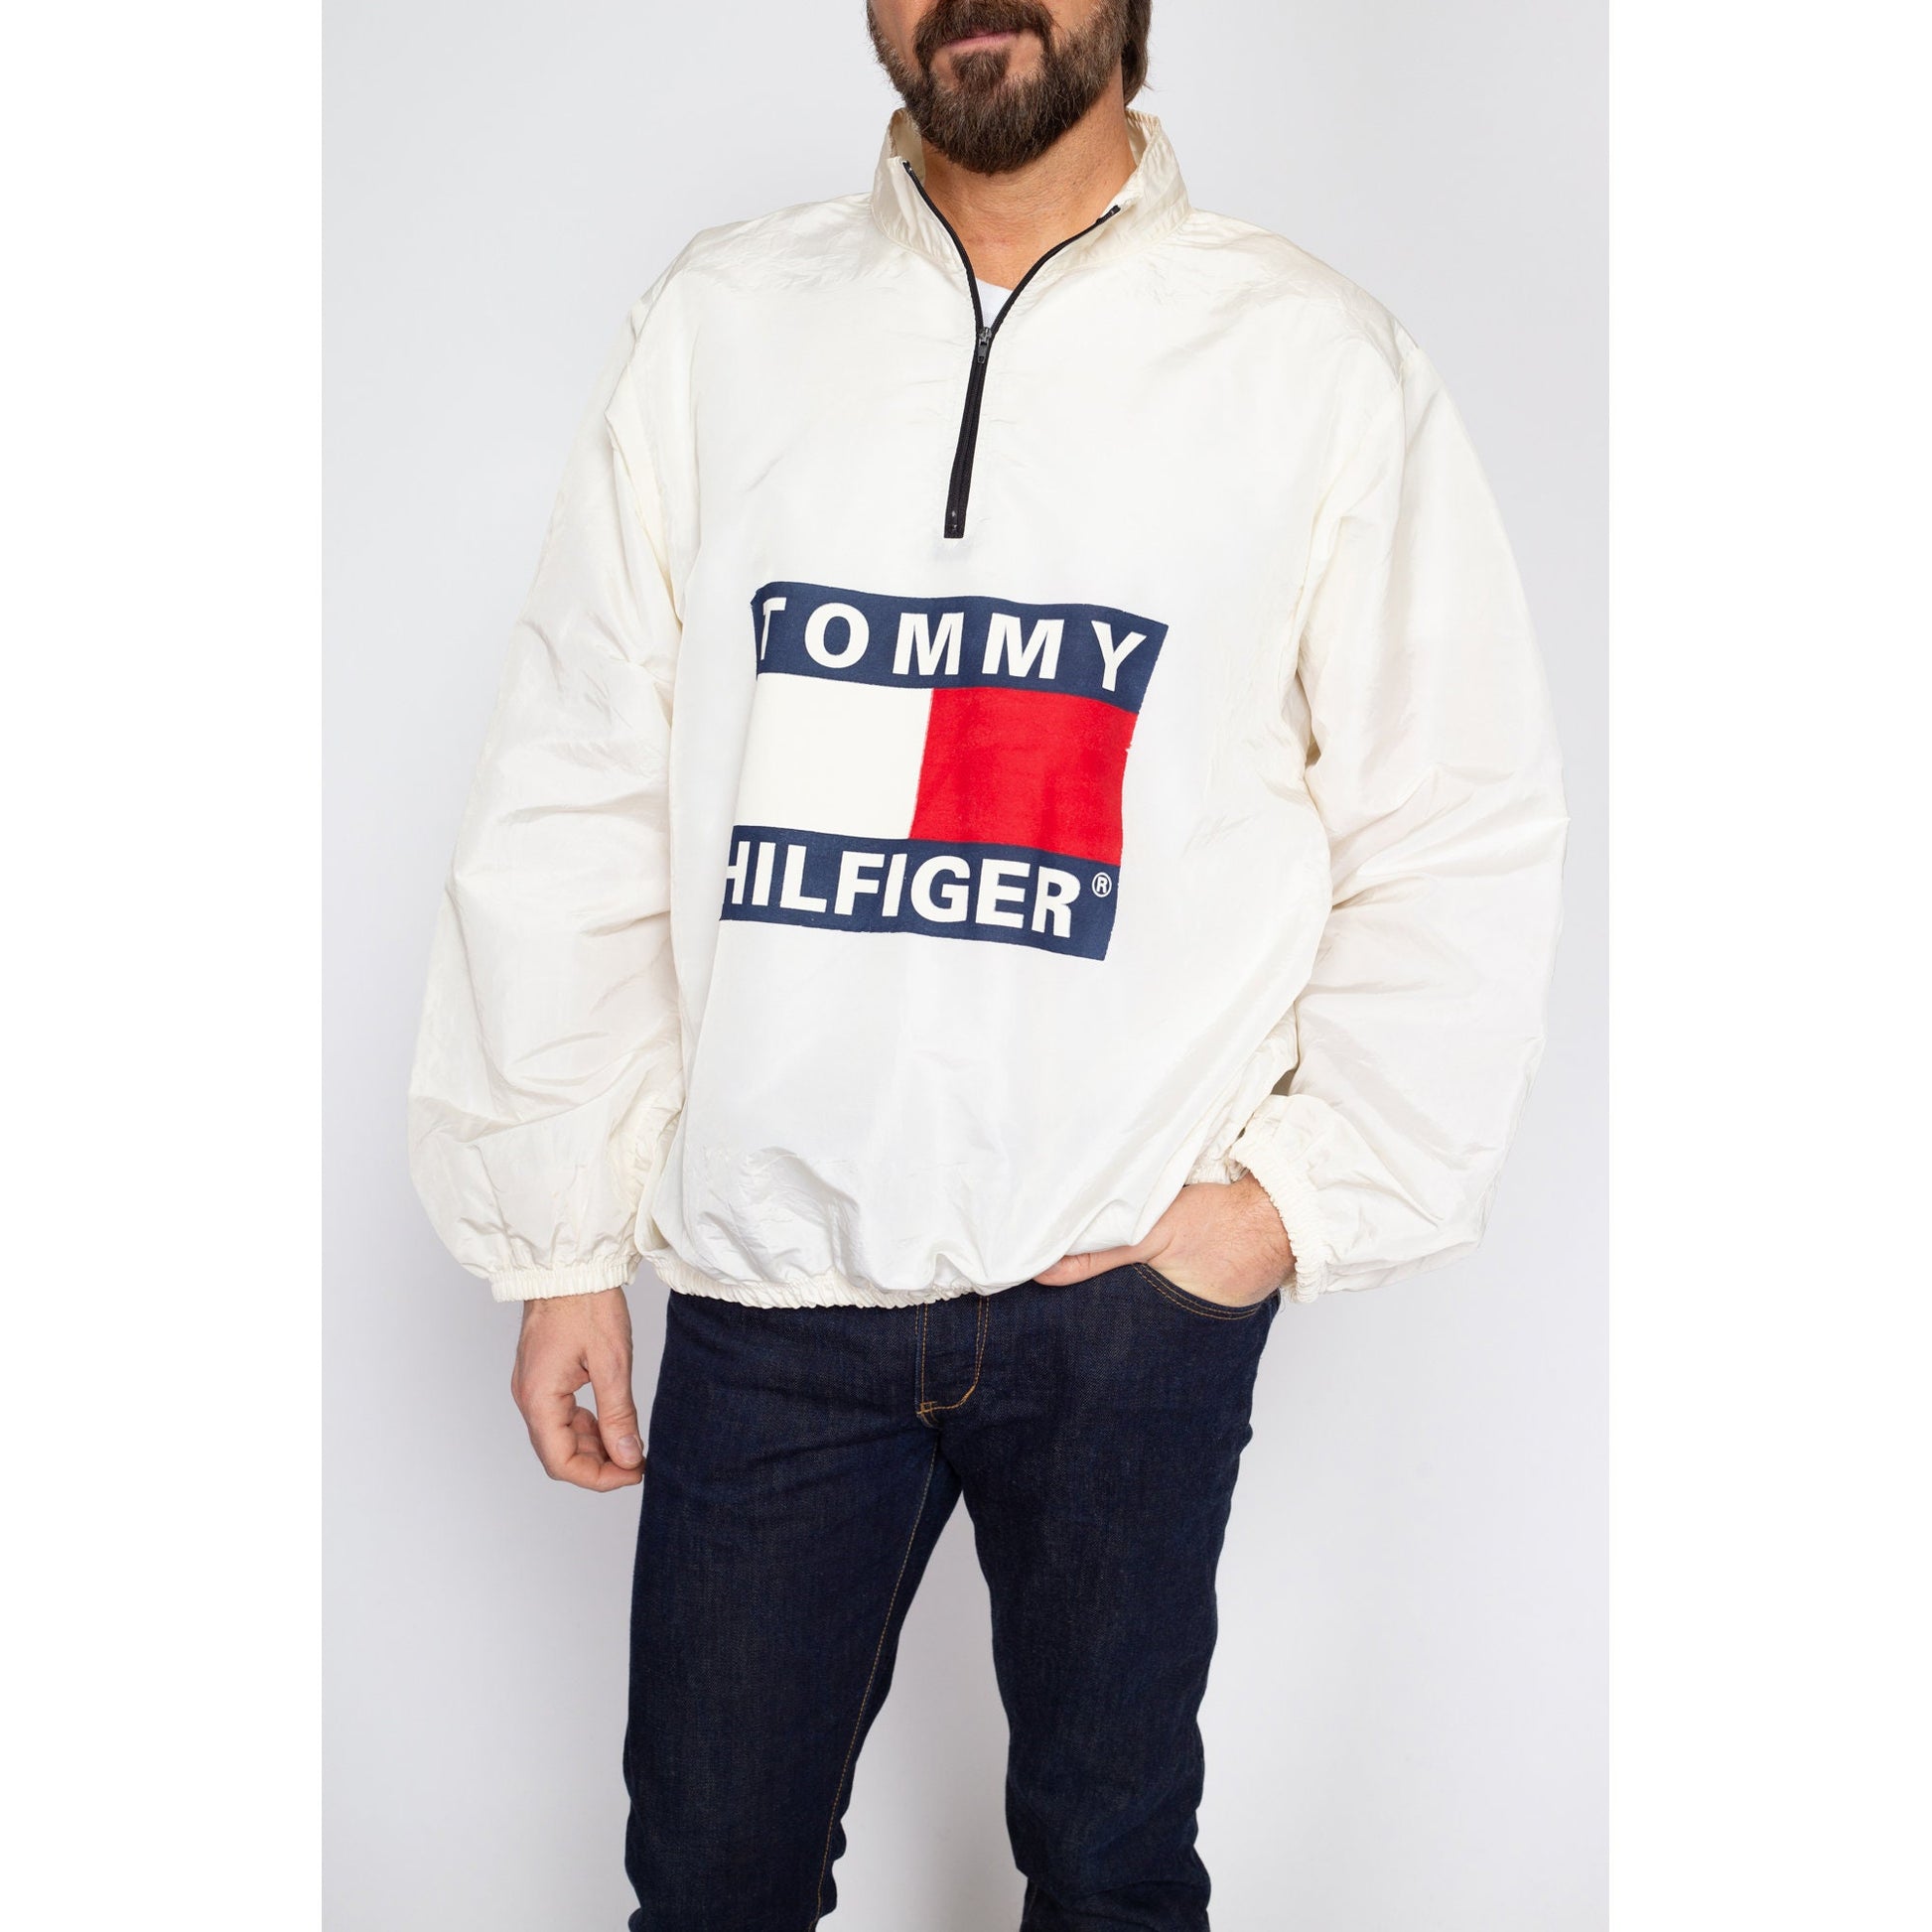 Tommy Hilfiger, You Are Not The First Streetwear Designer